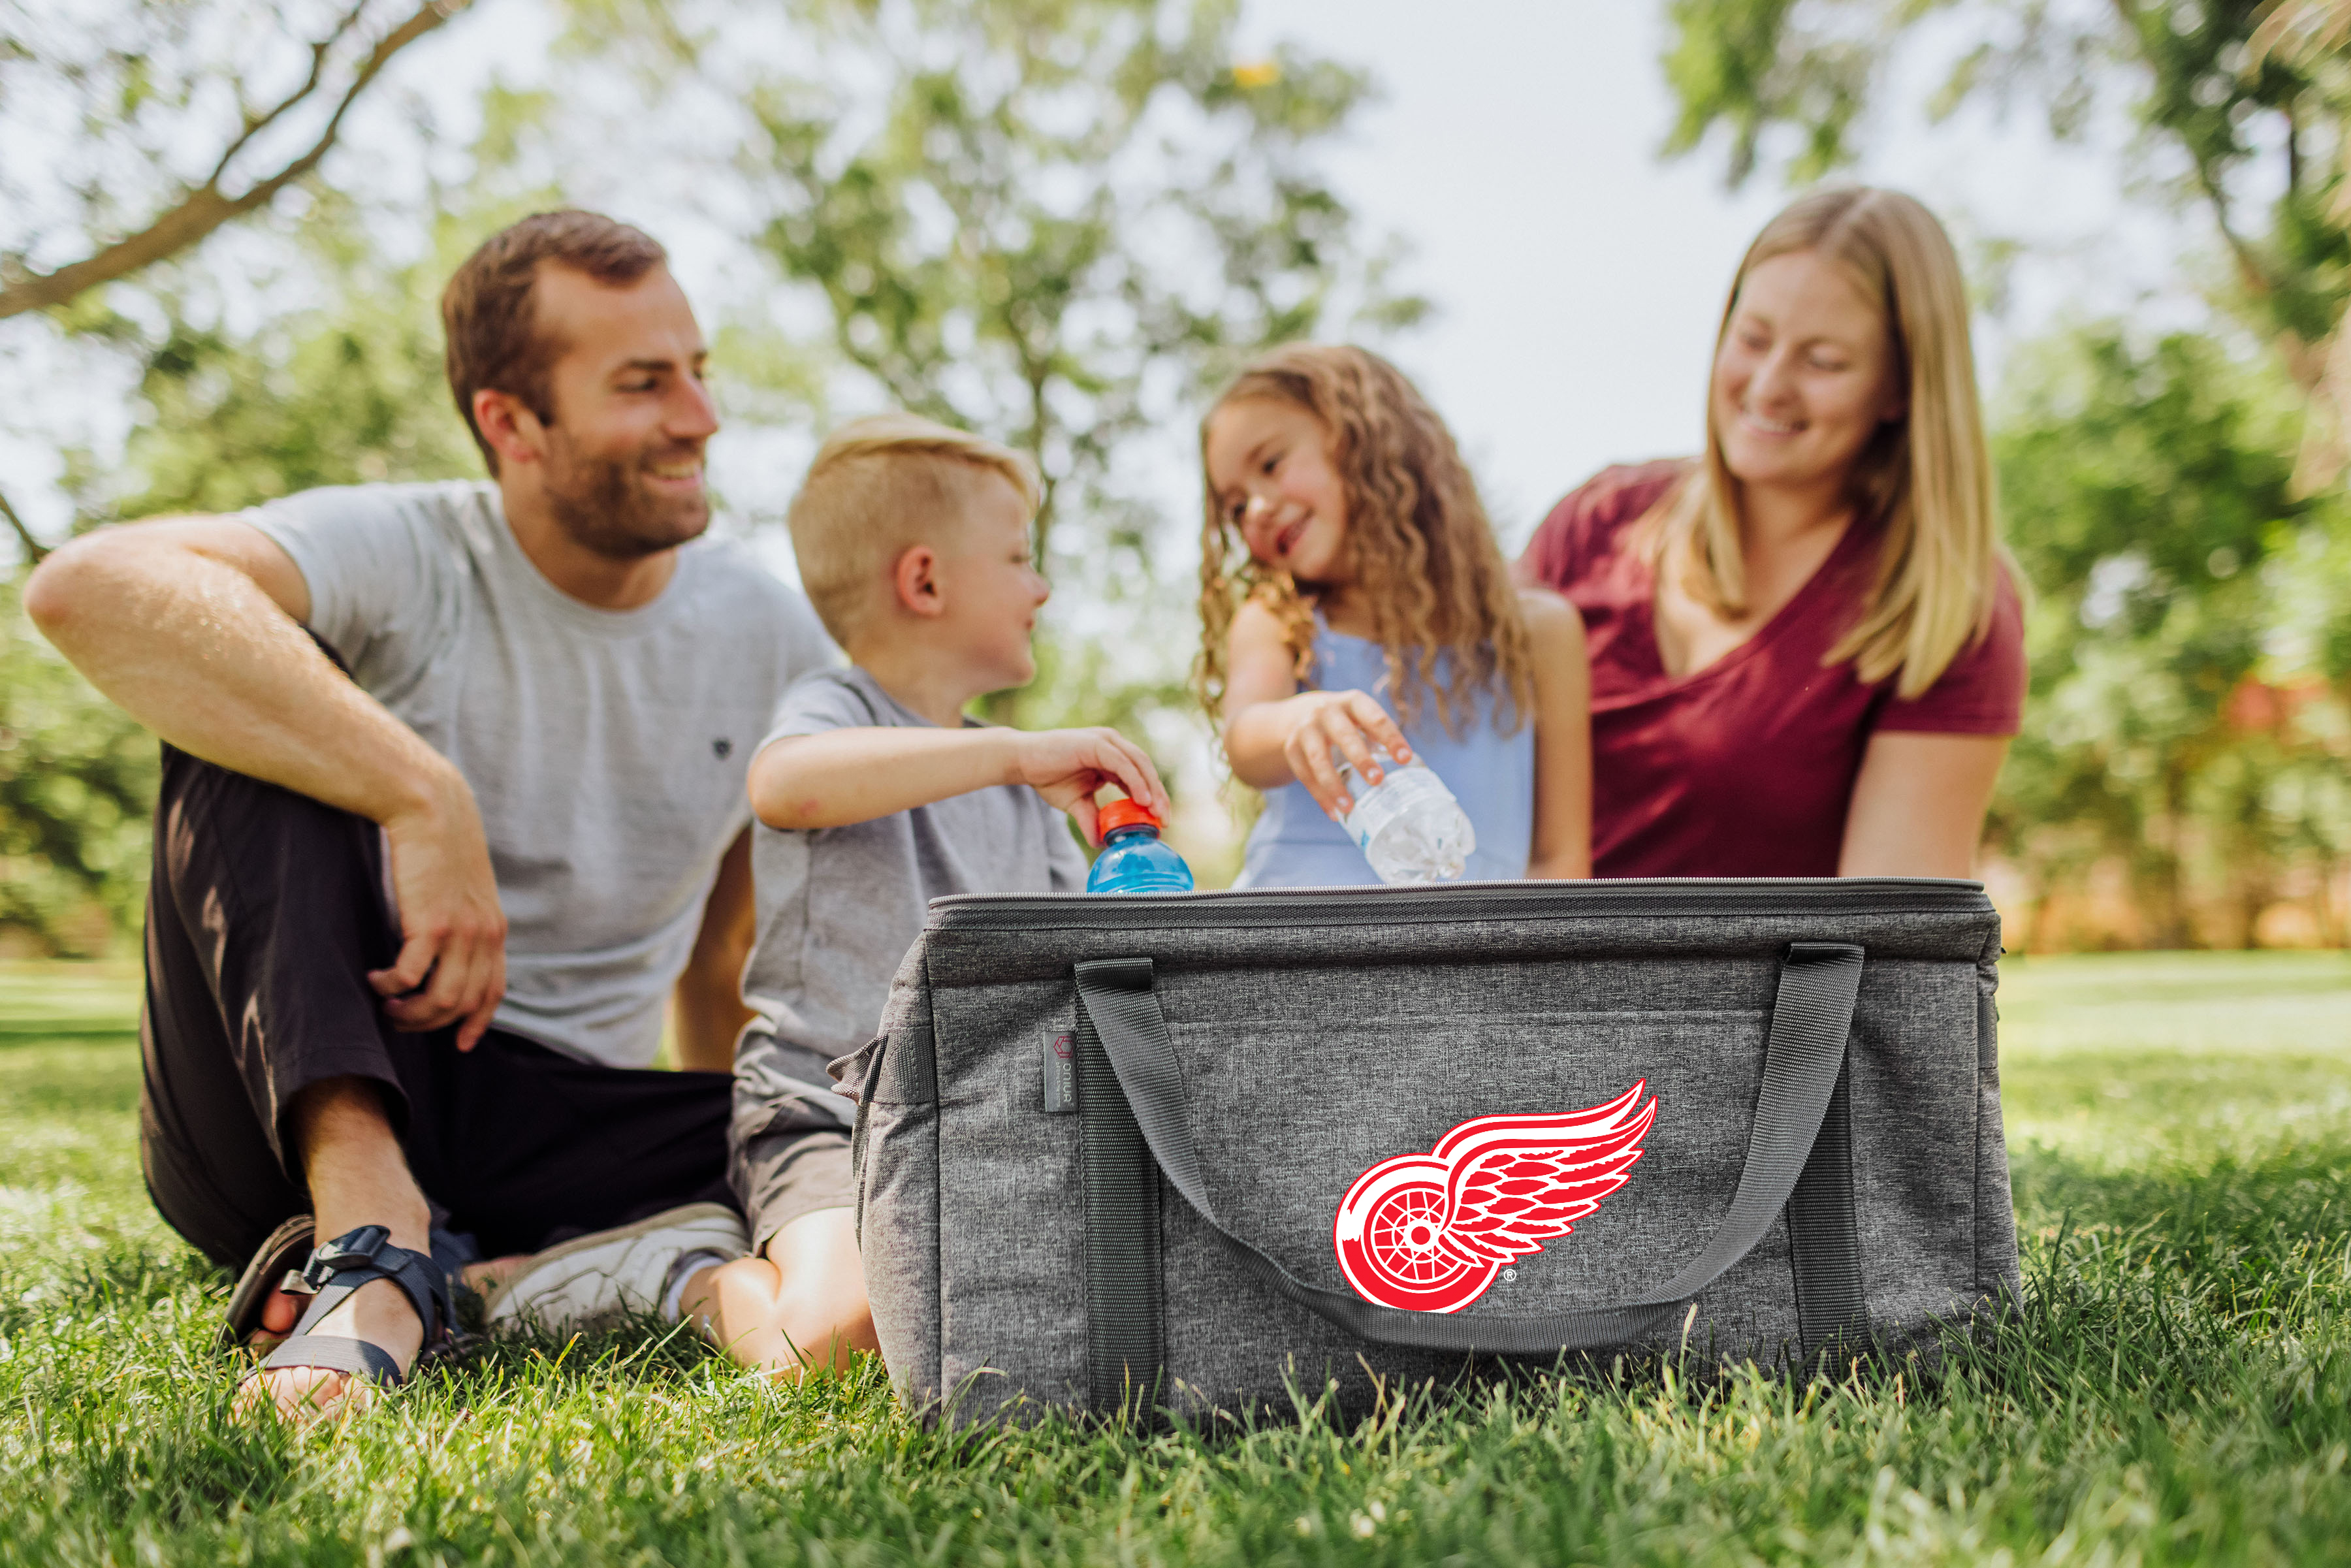 Detroit Red Wings - 64 Can Collapsible Cooler